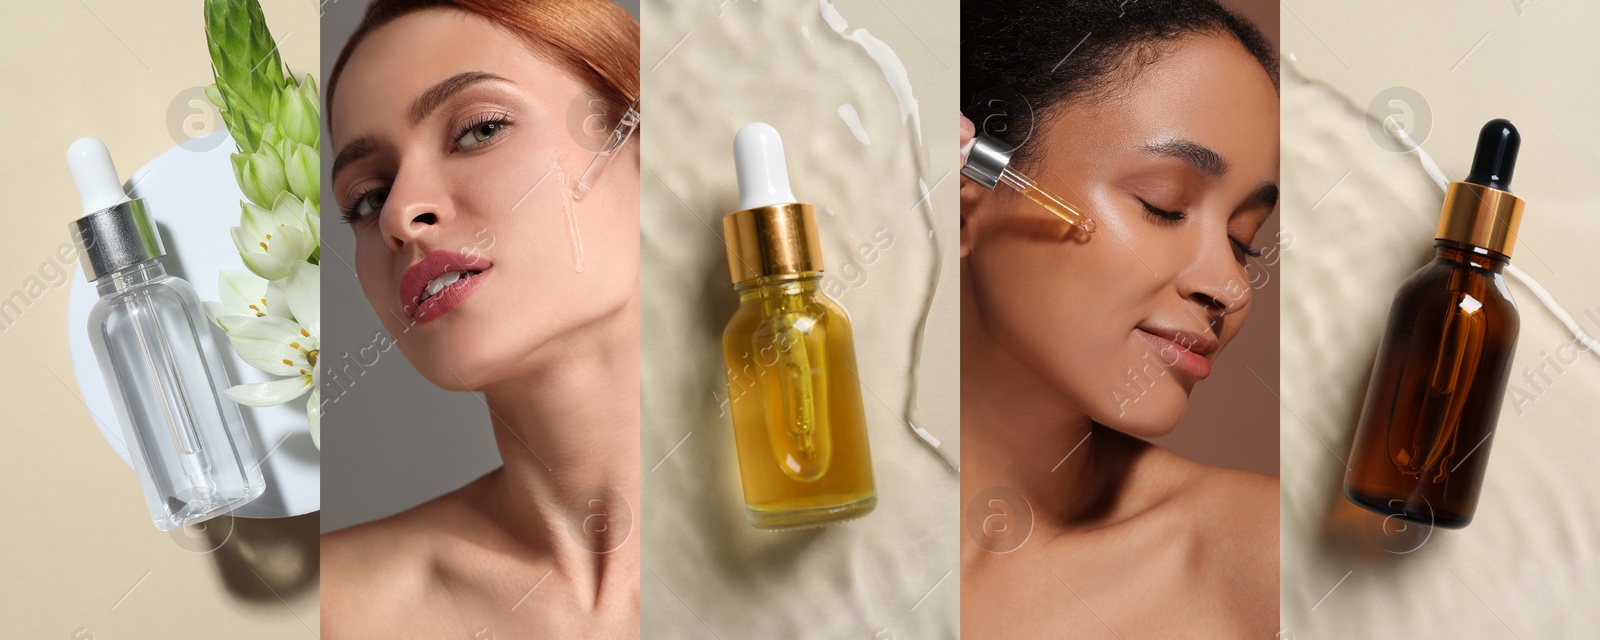 Image of Spa treatment, collage. Photos of beautiful women applying serum, different bottles of skin care product